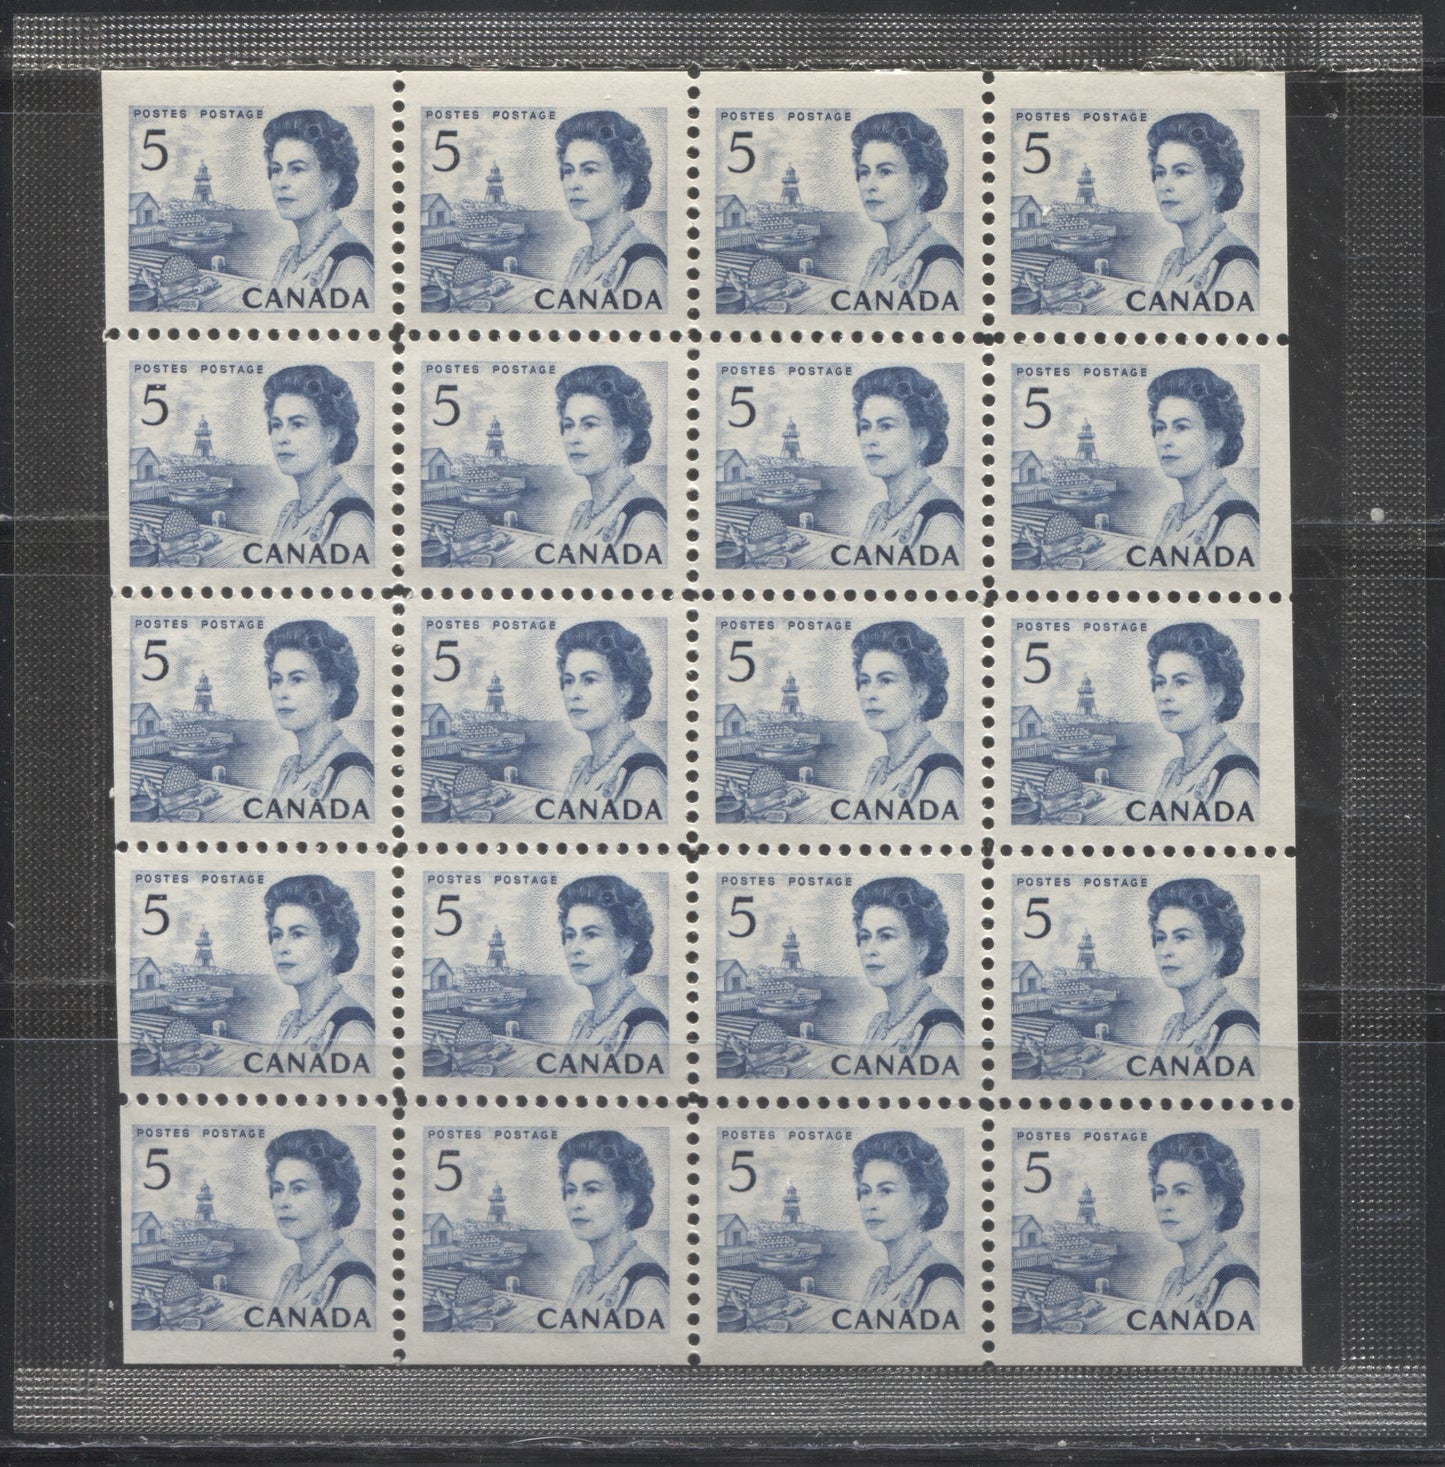 Lot 256 Canada #458b 5c Blue, Atlantic Fishing Village, 1967-1973 Centennial Issue, A VFNH Sealed Cello Paq Containing 1 Pane of 20, No Instructions or Logo, Miscut on Left Side, DF Greyish White, Smooth Dex